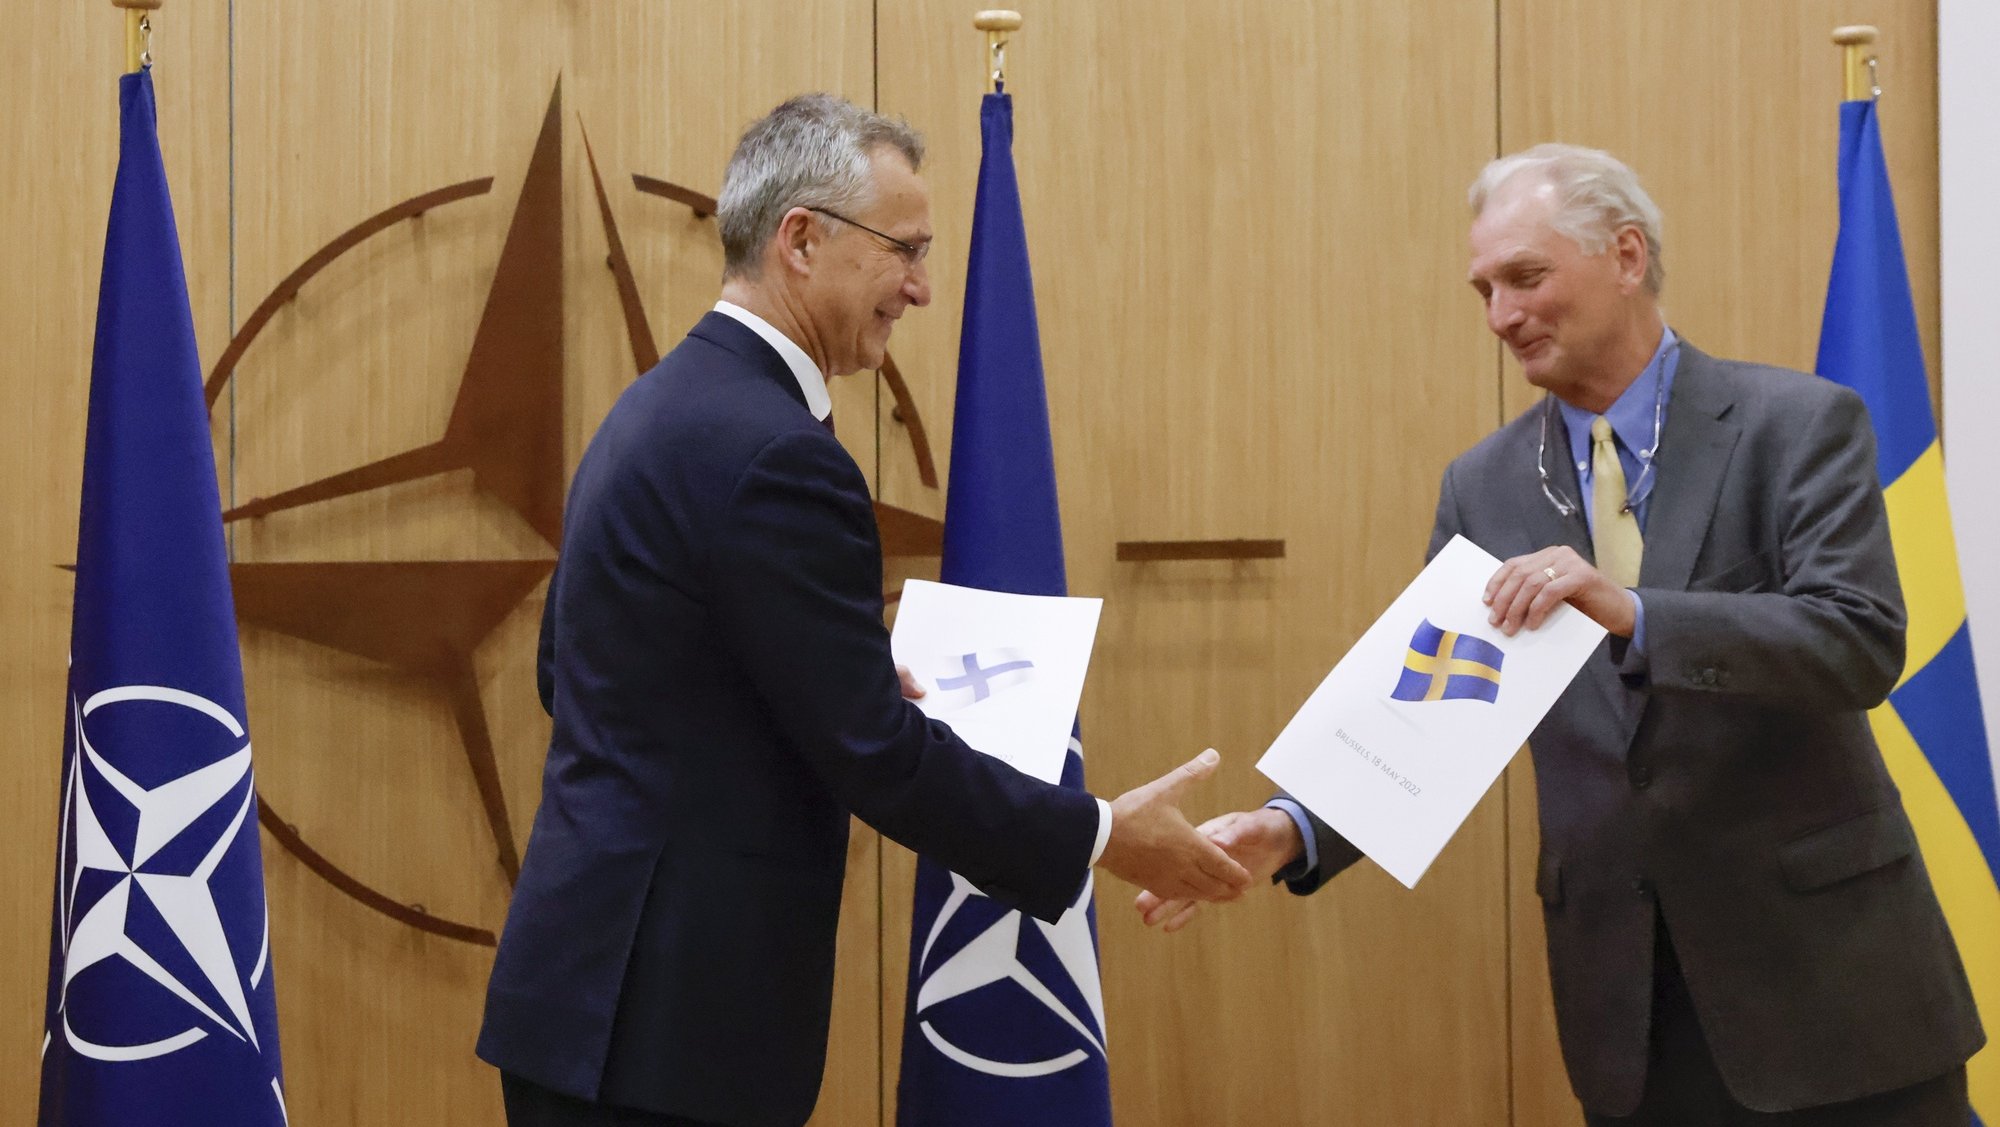 epa09954346 NATO Secretary-General Jens Stoltenberg (L) and Sweden&#039;s Ambassador to NATO Axel Wernhoff shake hands during a ceremony to mark Sweden&#039;s and Finland&#039;s application for membership in Brussels, Belgium, 18 May 2022. Finland and Sweden are applying for NATO membership as a result of Russia&#039;s invasion of Ukraine. The move would bring the expansion of the Western military alliance to 32 member countries.  EPA/JOHANNA GERON / POOL